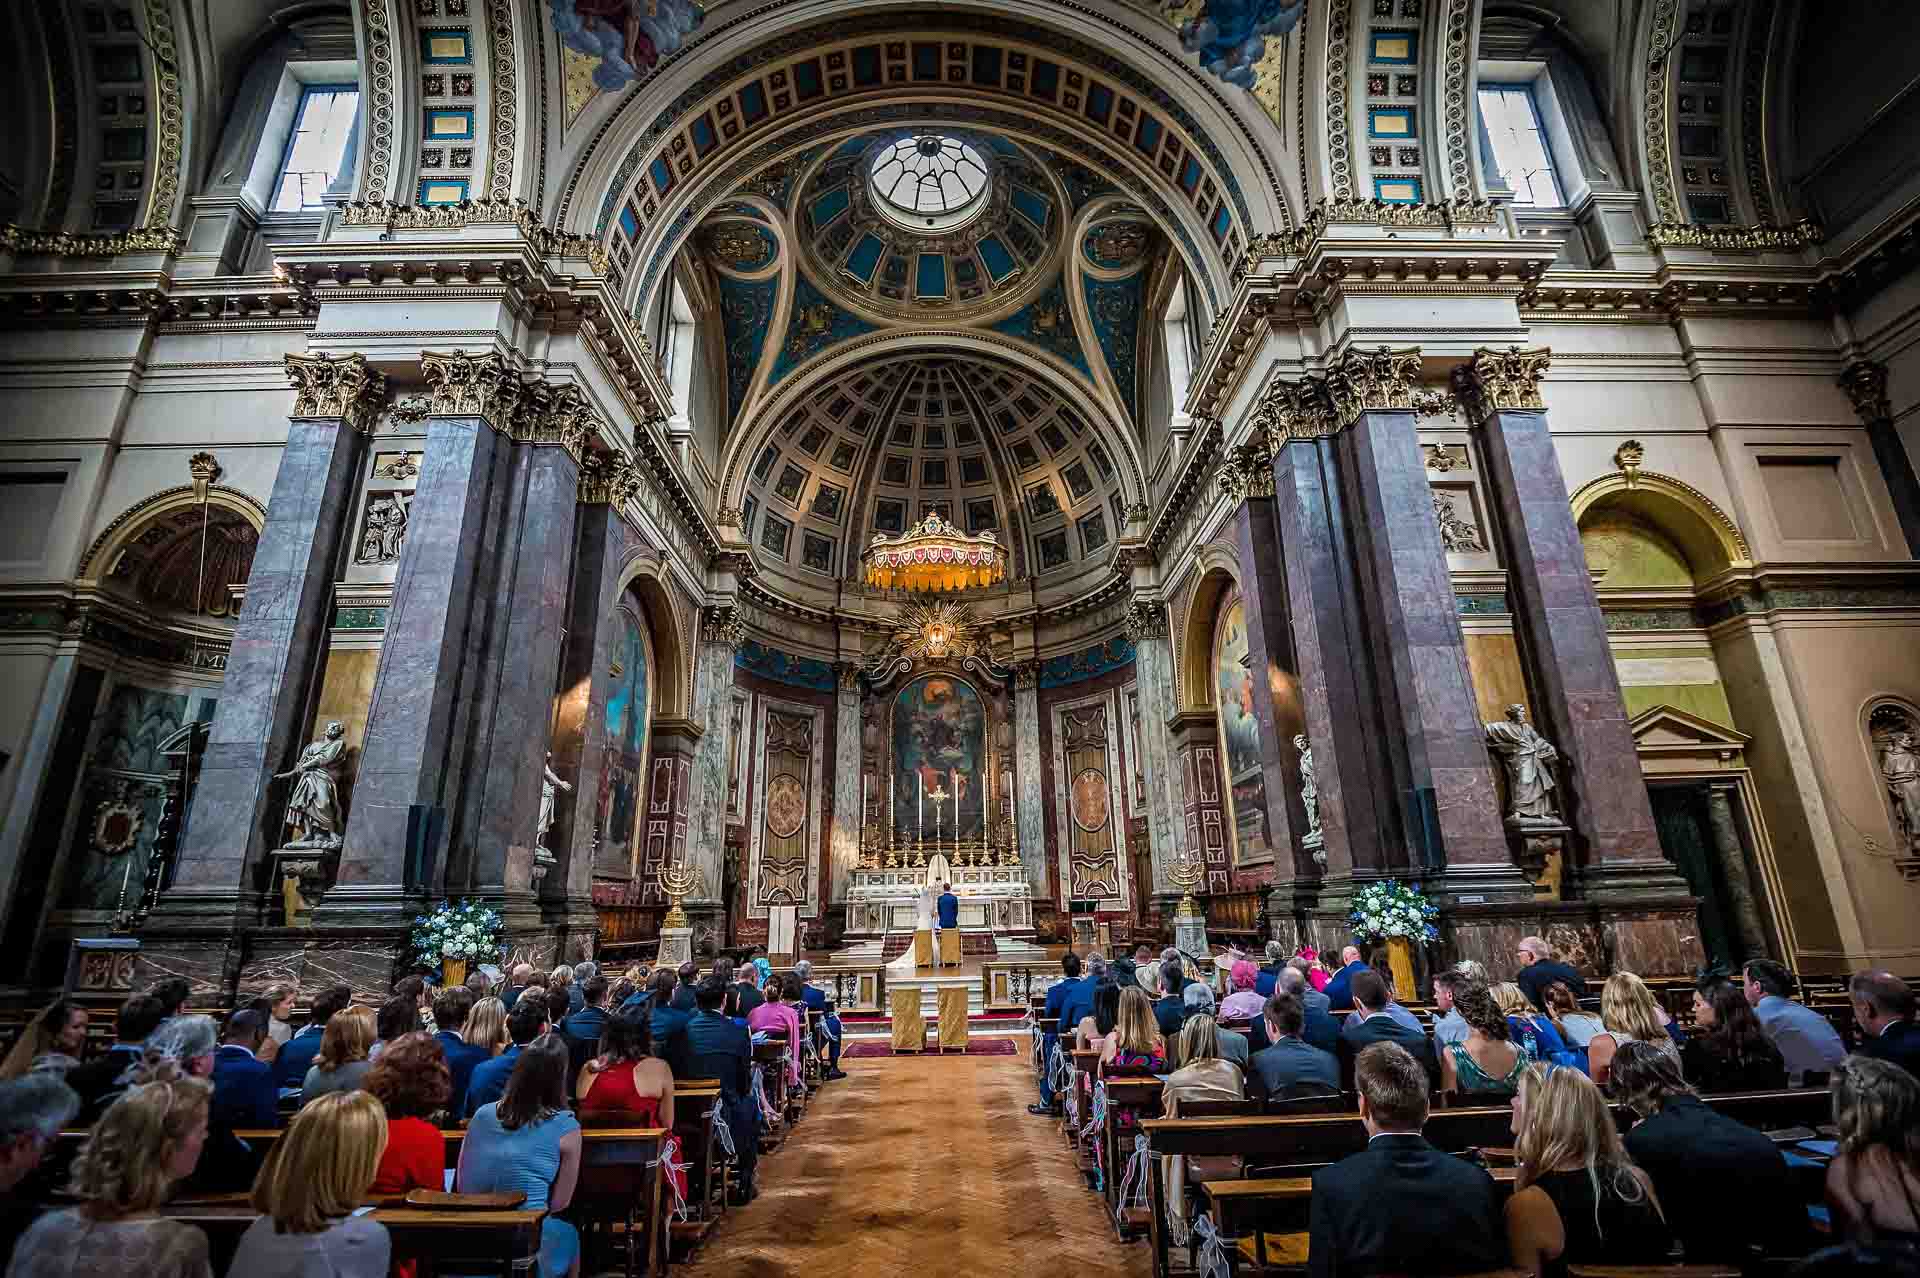 Brompton Oratory Wedding Photography - The Church and Wedding Guests from the Back